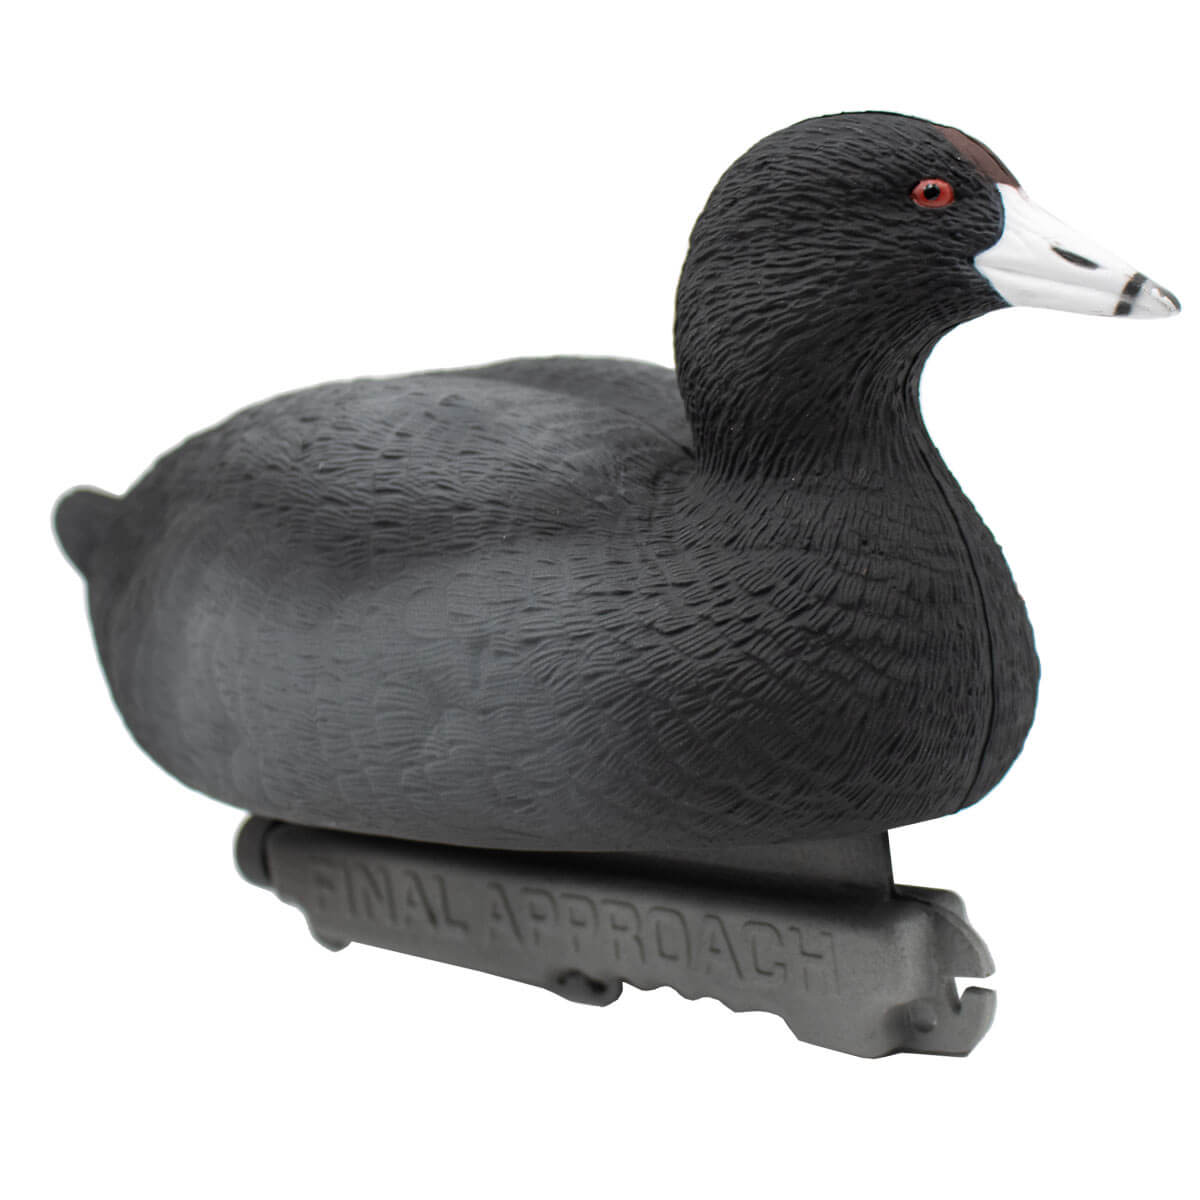 FA Blässhuhn Attrappe Floating Coot